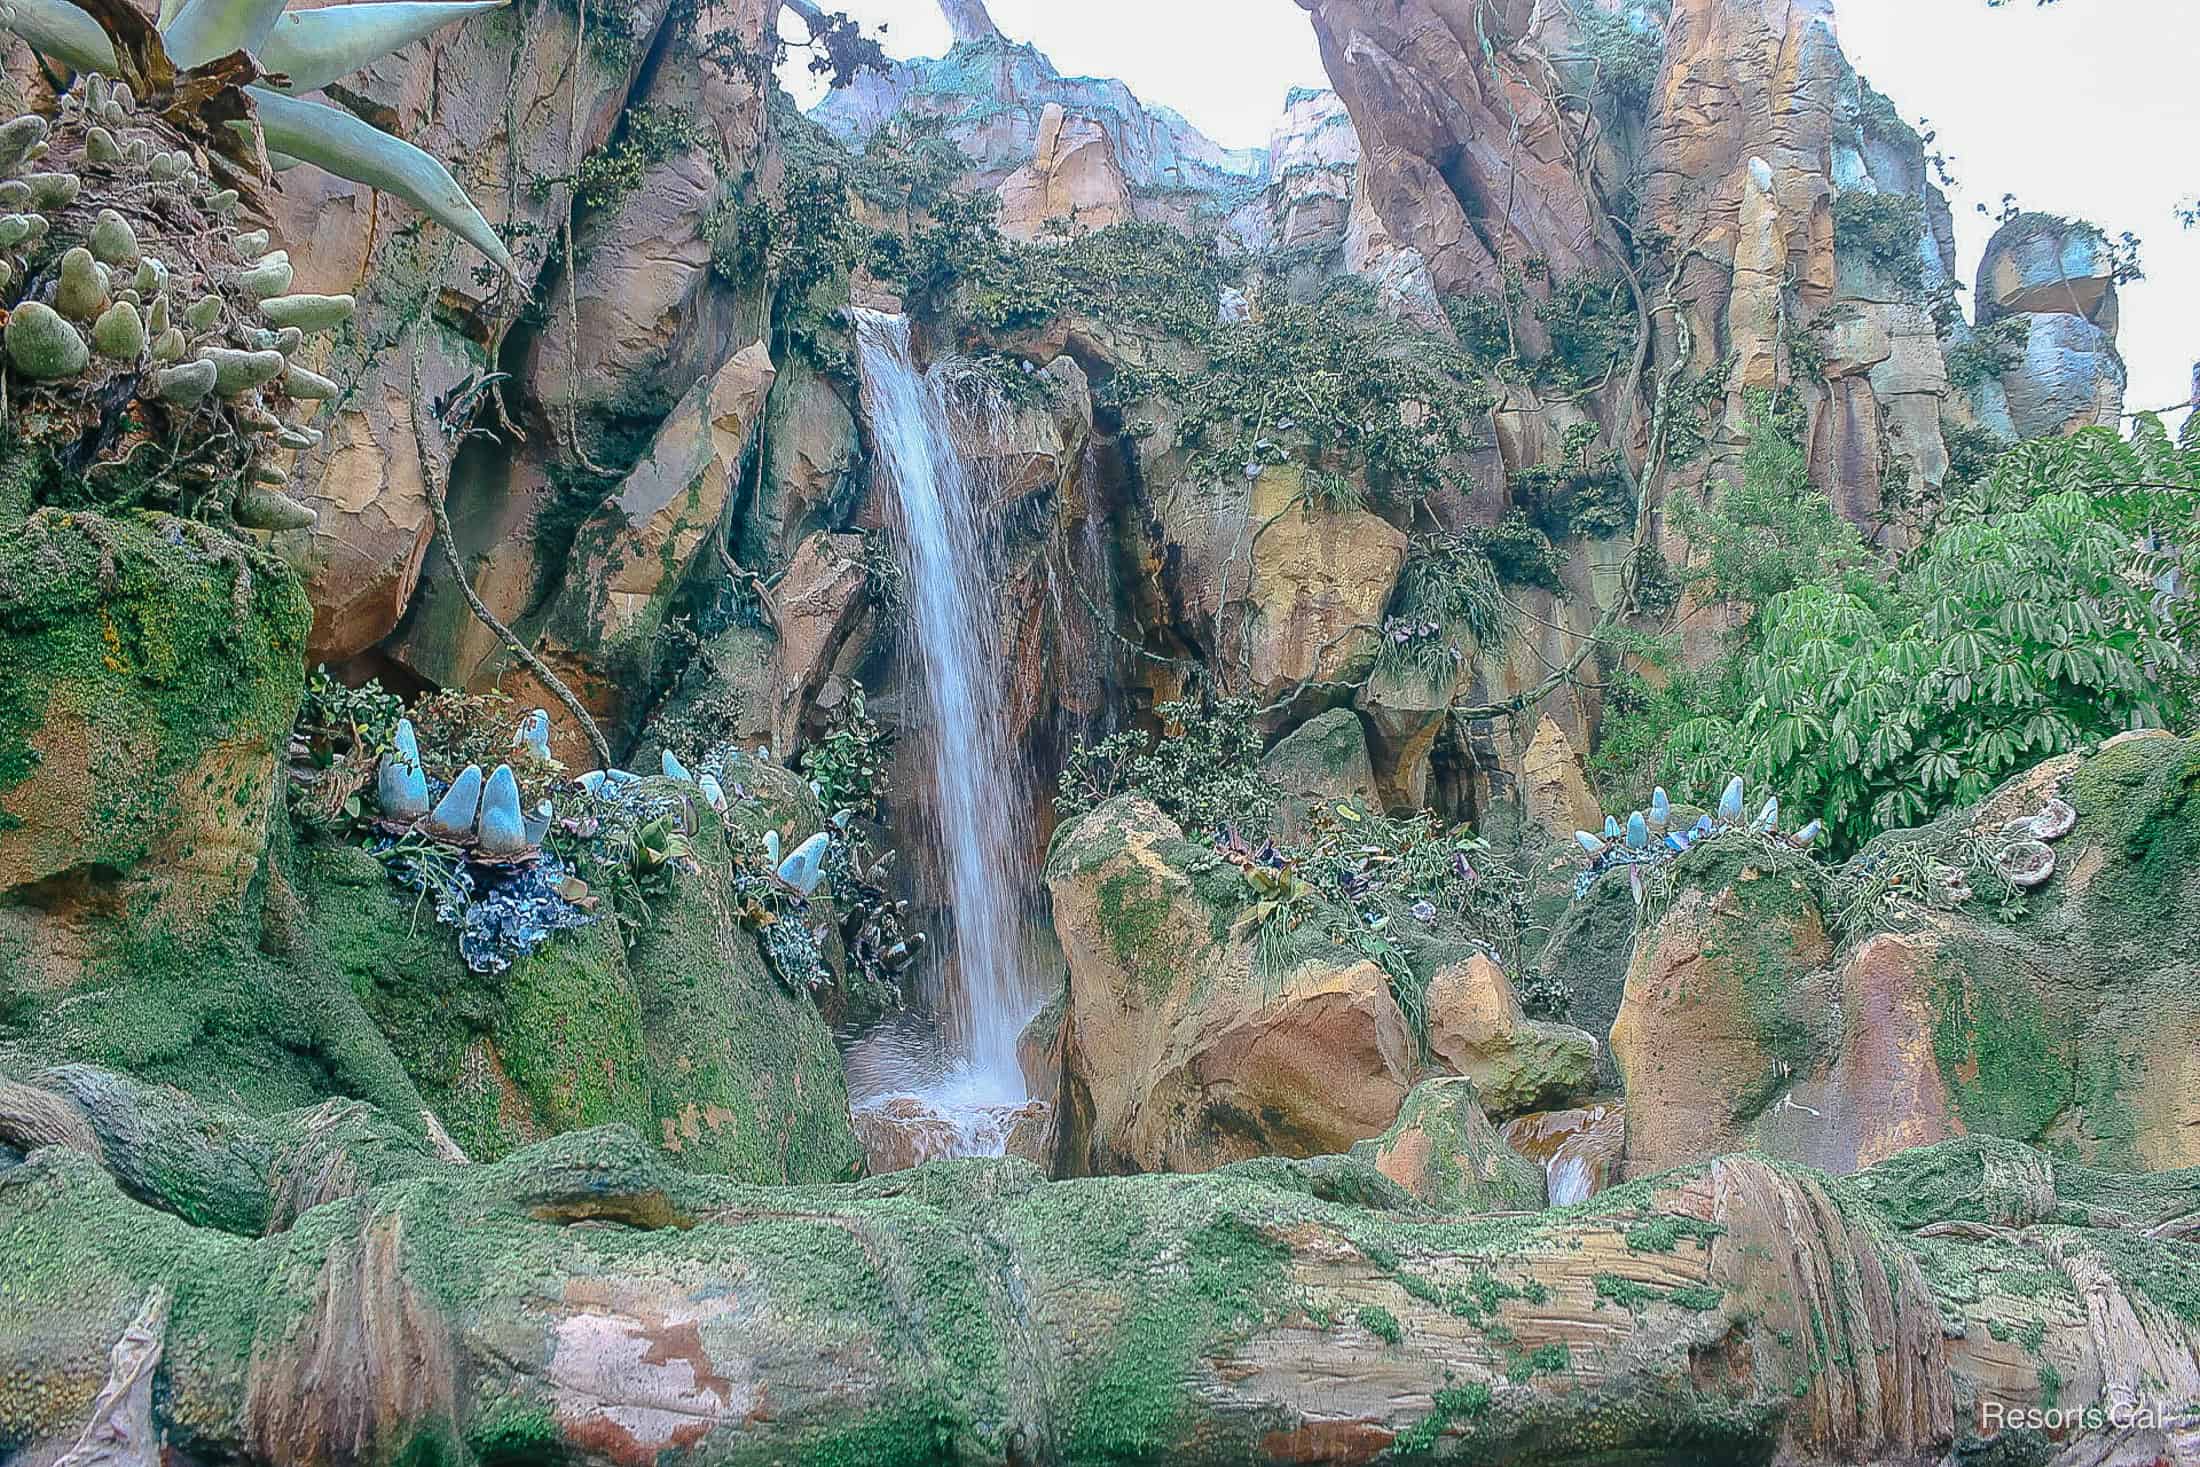 a waterfall with green moss growing on the rocks around it 